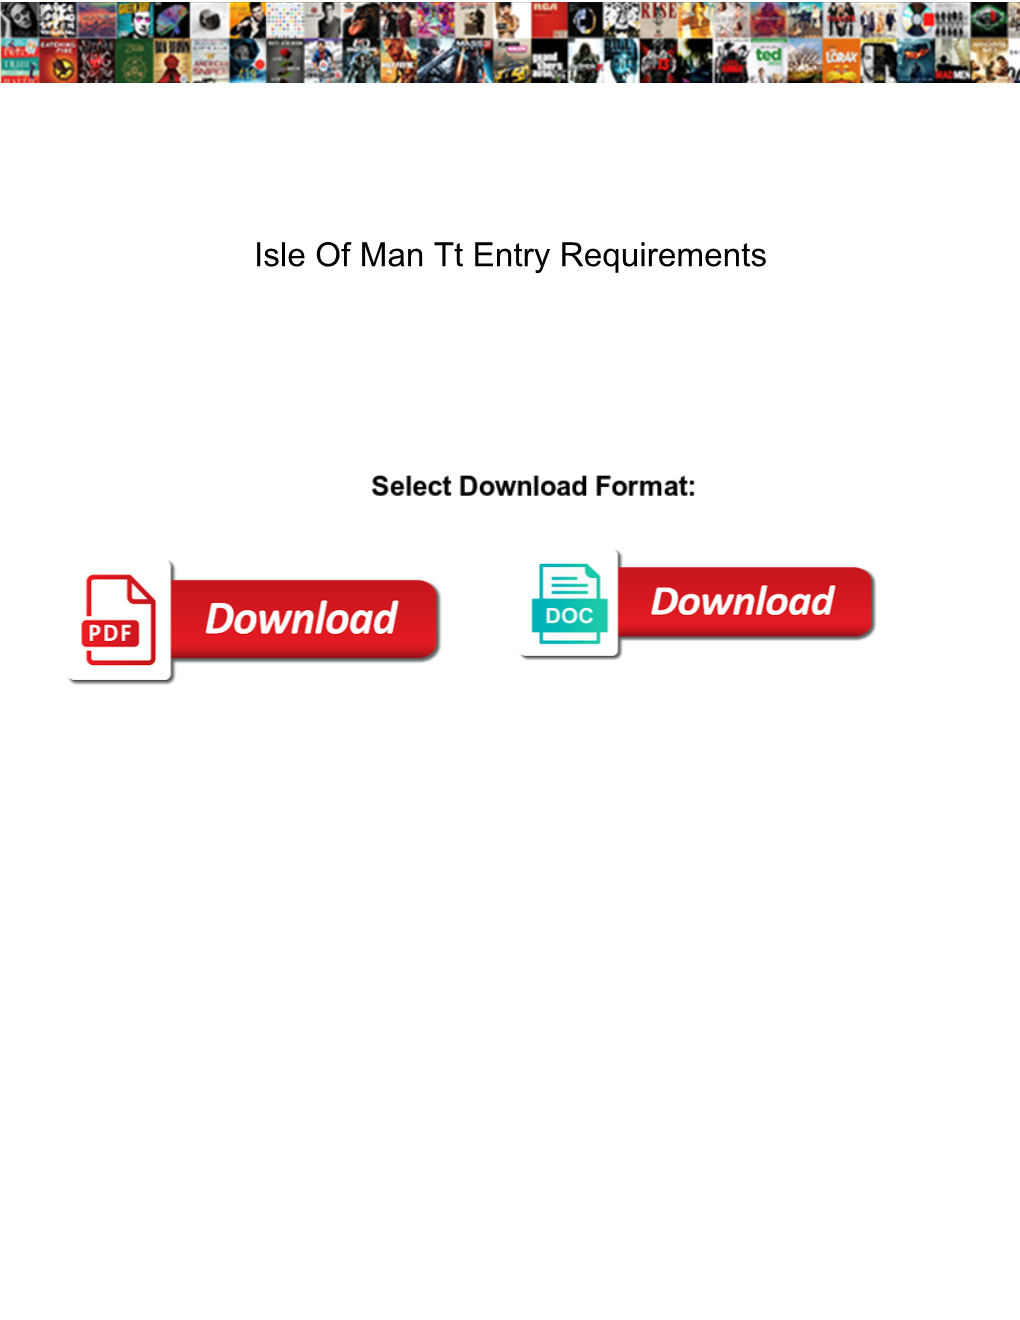 Isle of Man Tt Entry Requirements